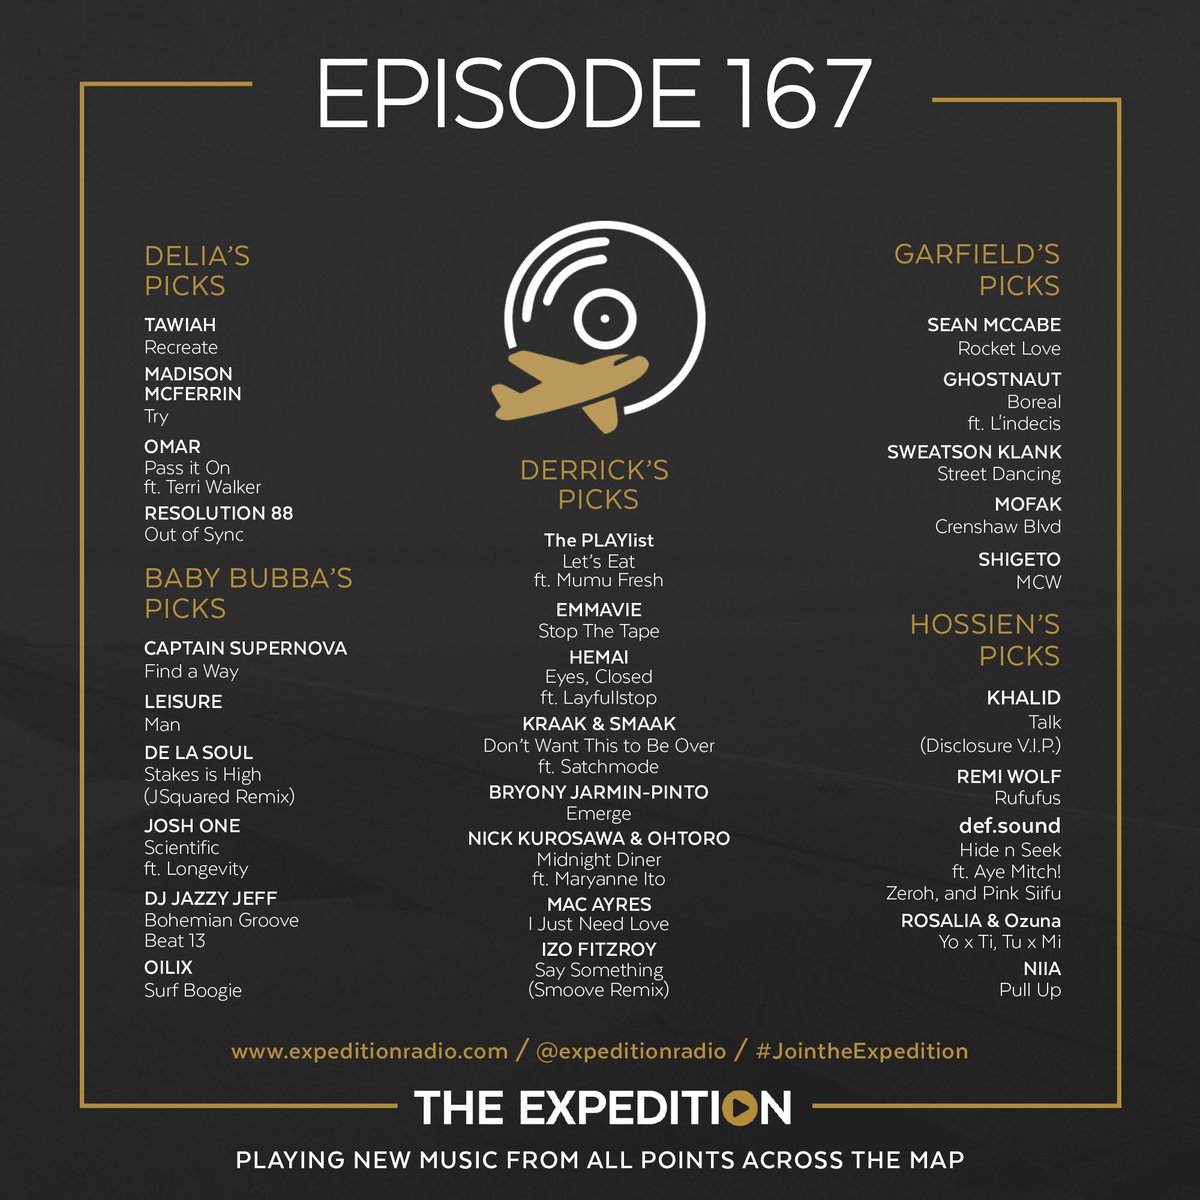 ✨EPISODE 167✨ 
New Episode up! #NowStreaming the #latestandgreatest in NEW music worldwide✈🌍

⏯
SoundCloud: bit.ly/expscEP167
Mixcloud: bit.ly/expmixEP167
Spotify: bit.ly/EXPspotify
Apple Podcasts: bit.ly/exppodEP167

expeditionradio.com